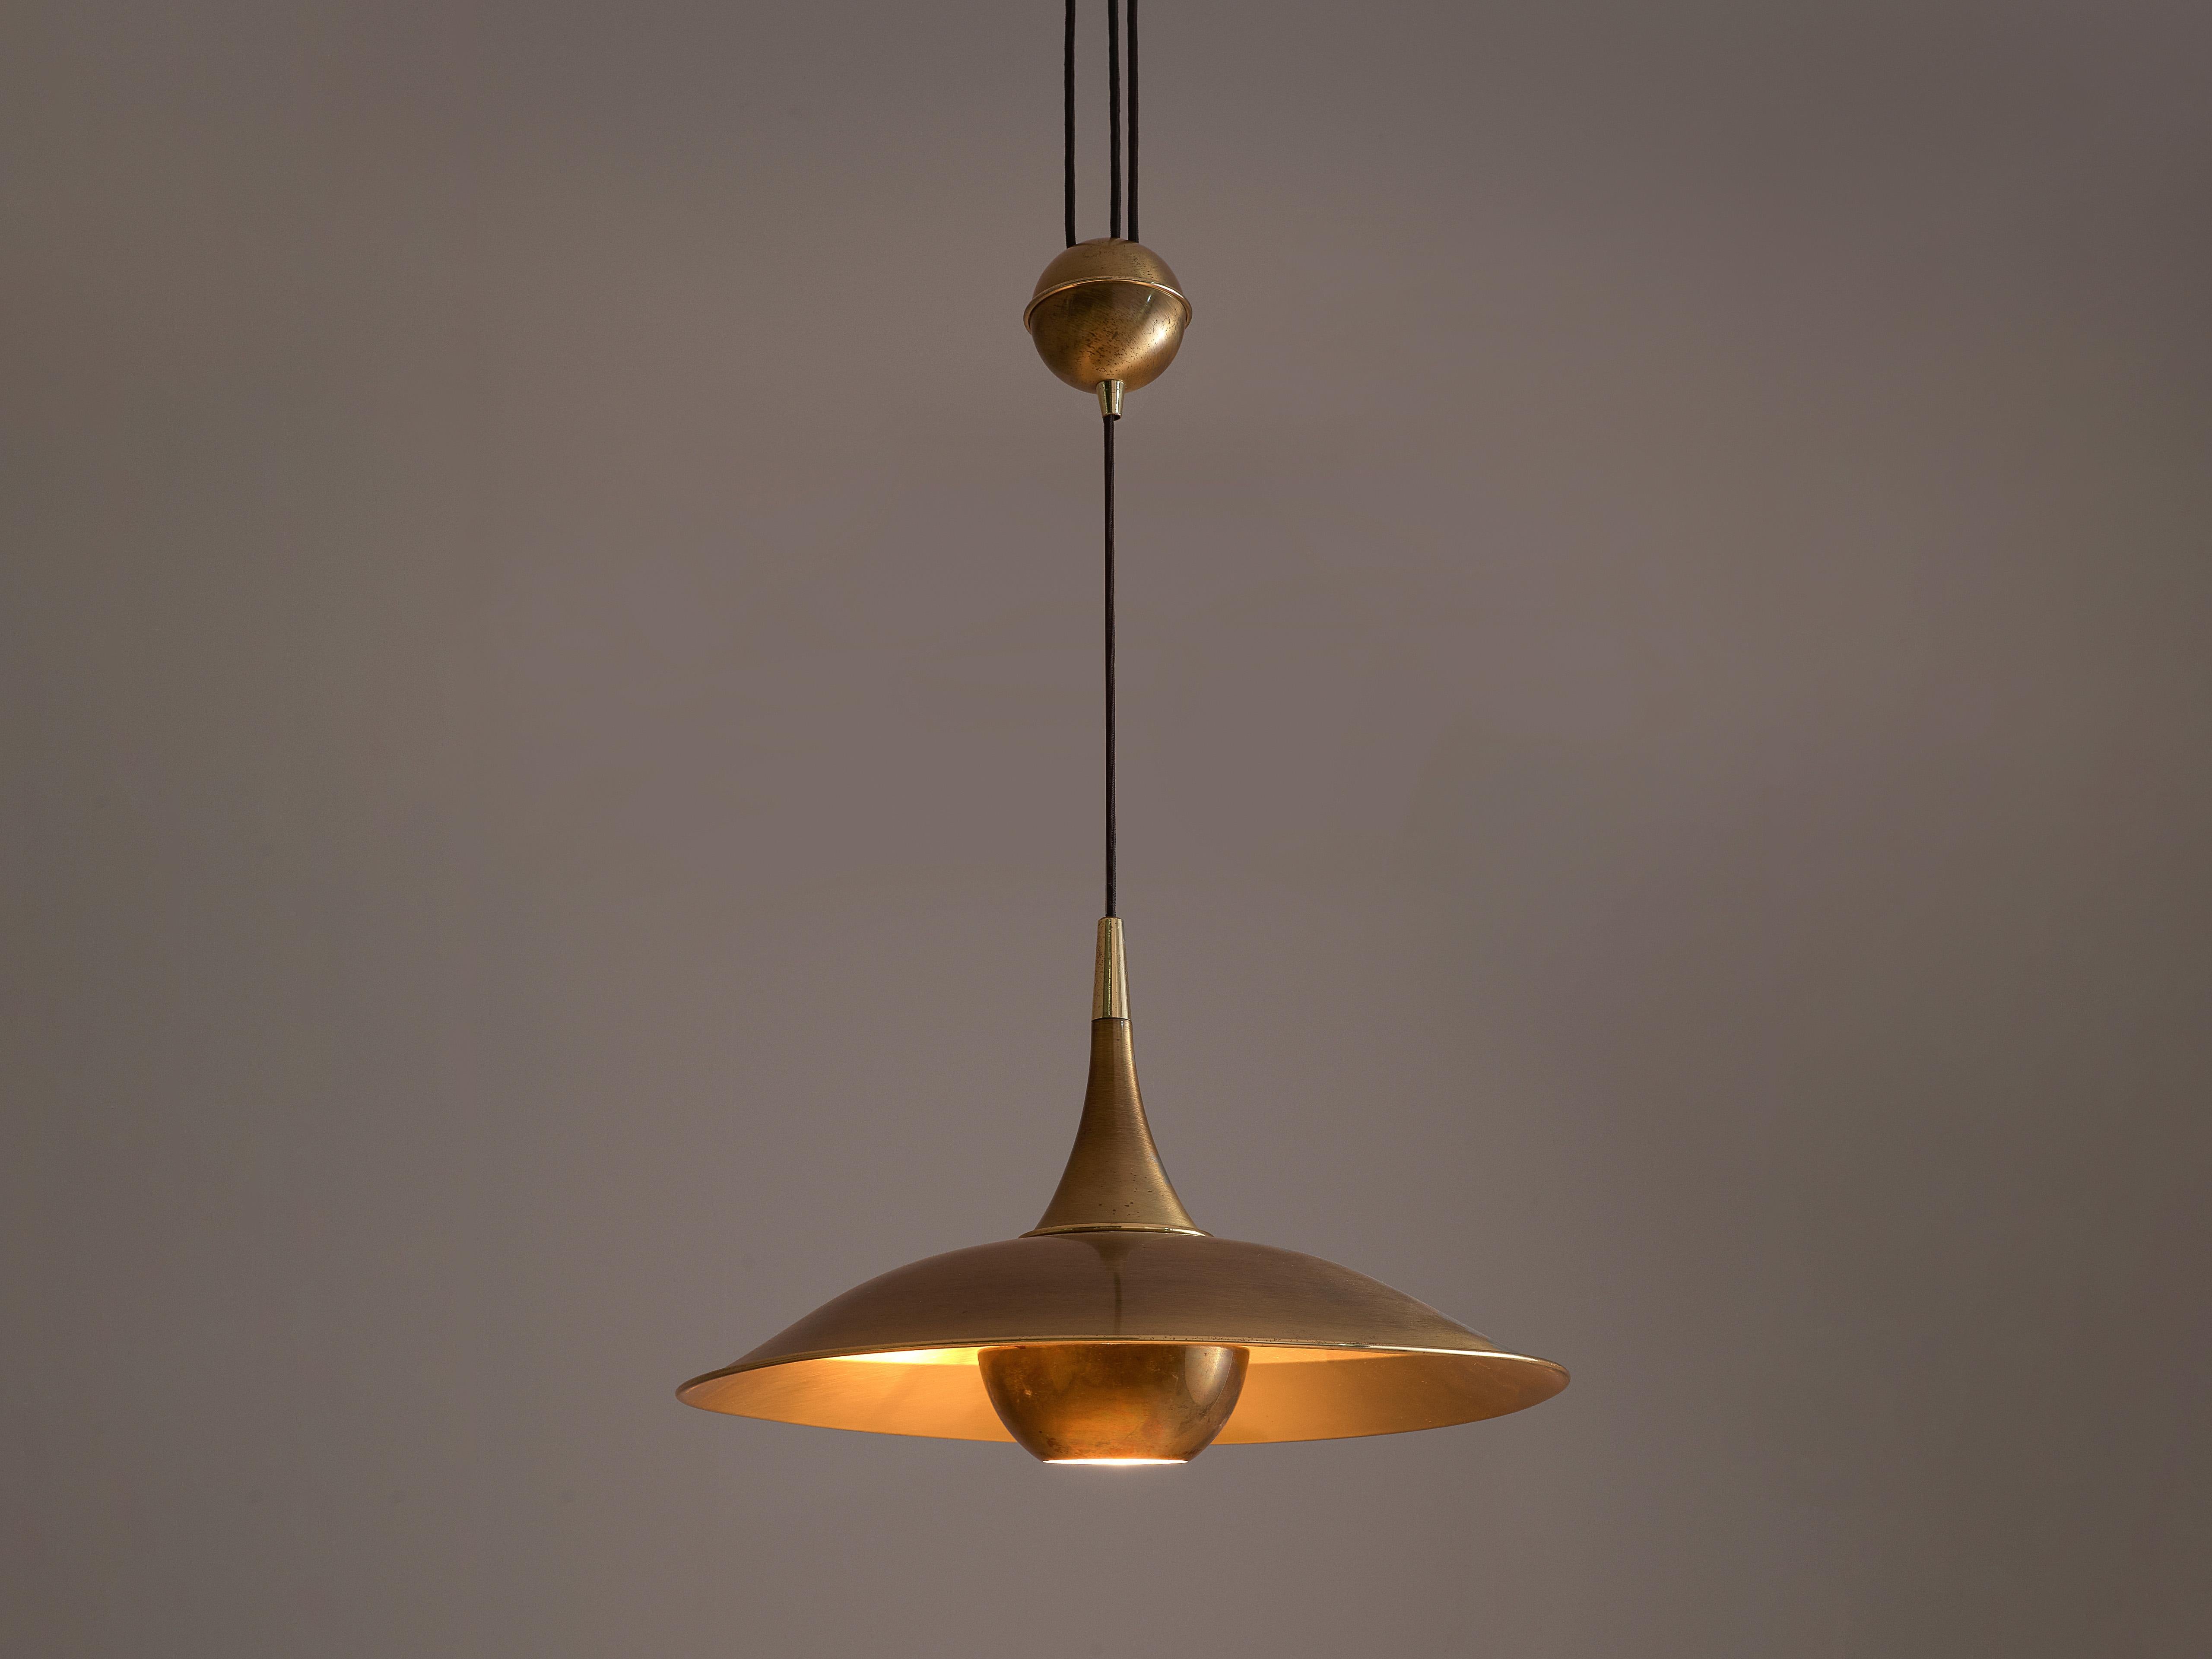 Painted Florian Schulz Adjustable Pendant in Brass with Counterweight